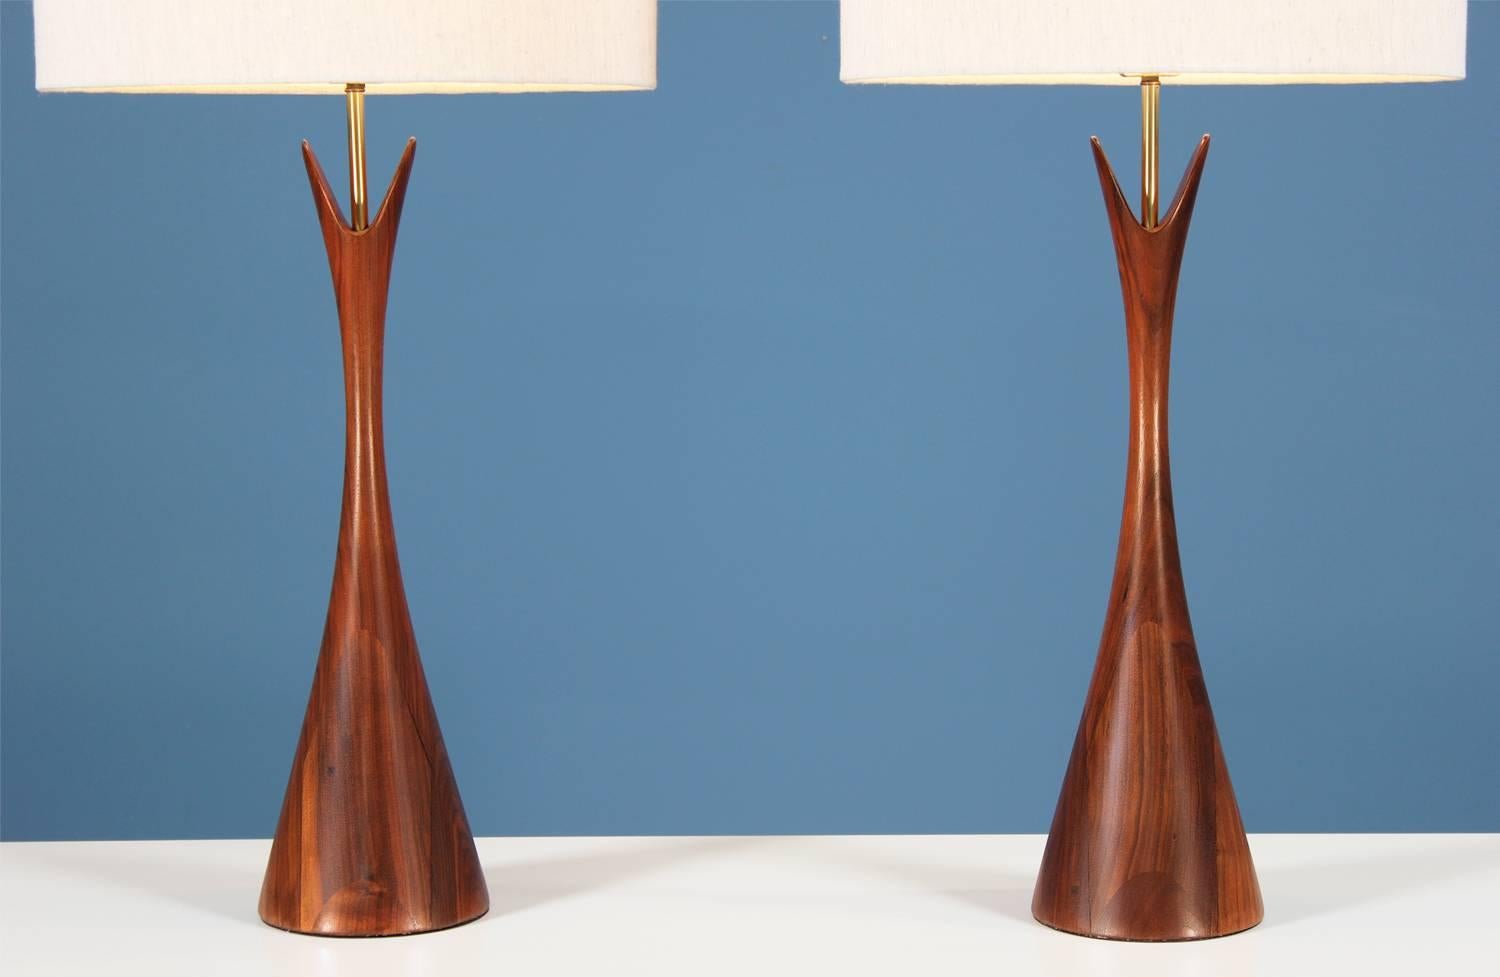 American Midcentury Sculpted Walnut Table Lamps by Modernera Lamp Co.